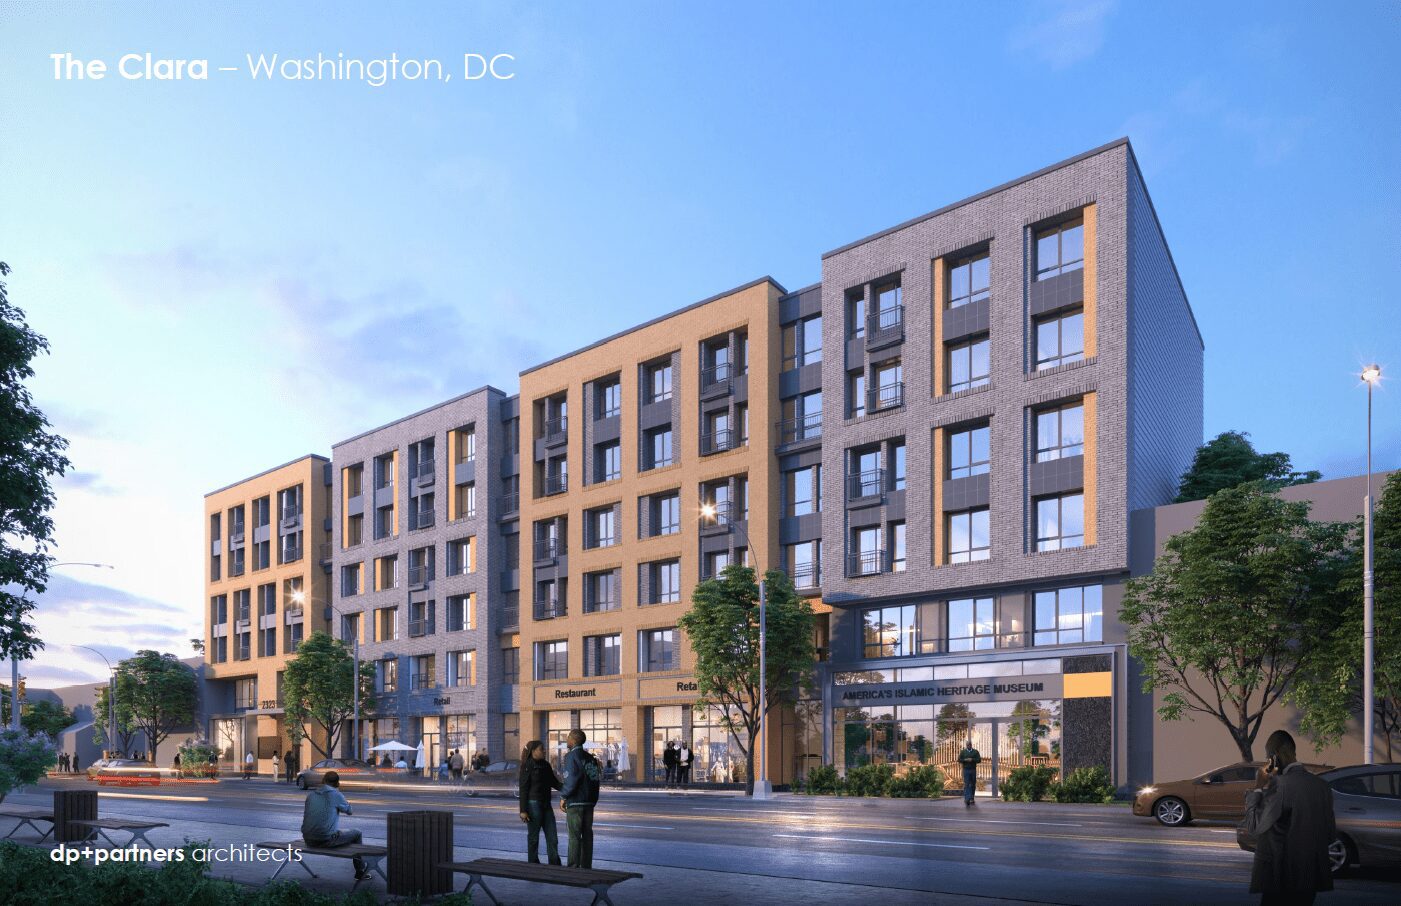 A rendering of the washington dc hotel project.